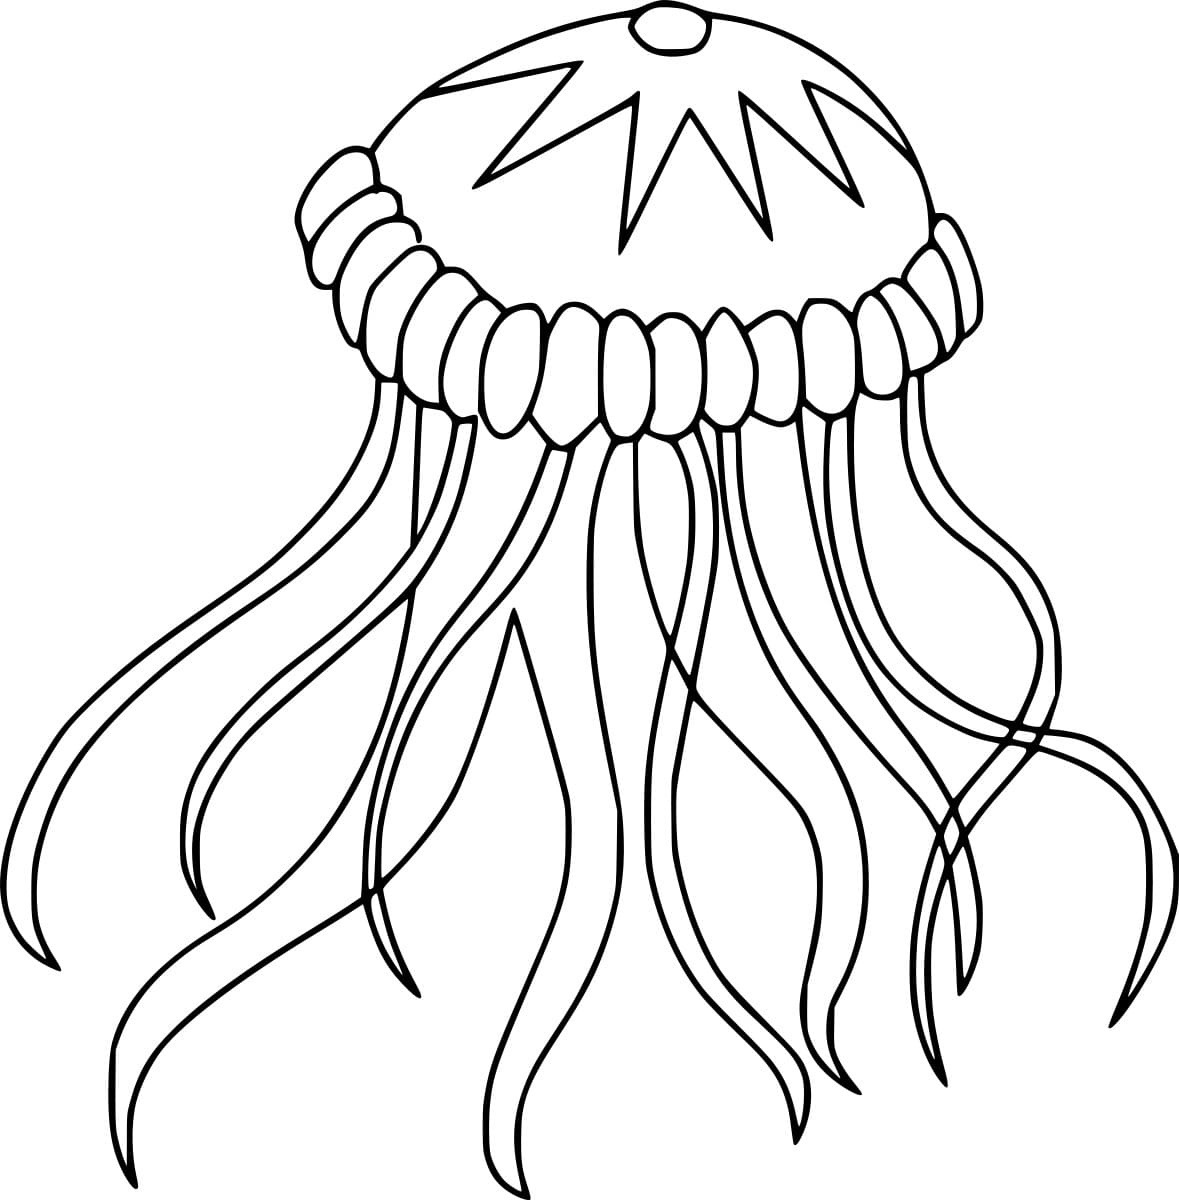 Compass Jellyfish Image Coloring Page